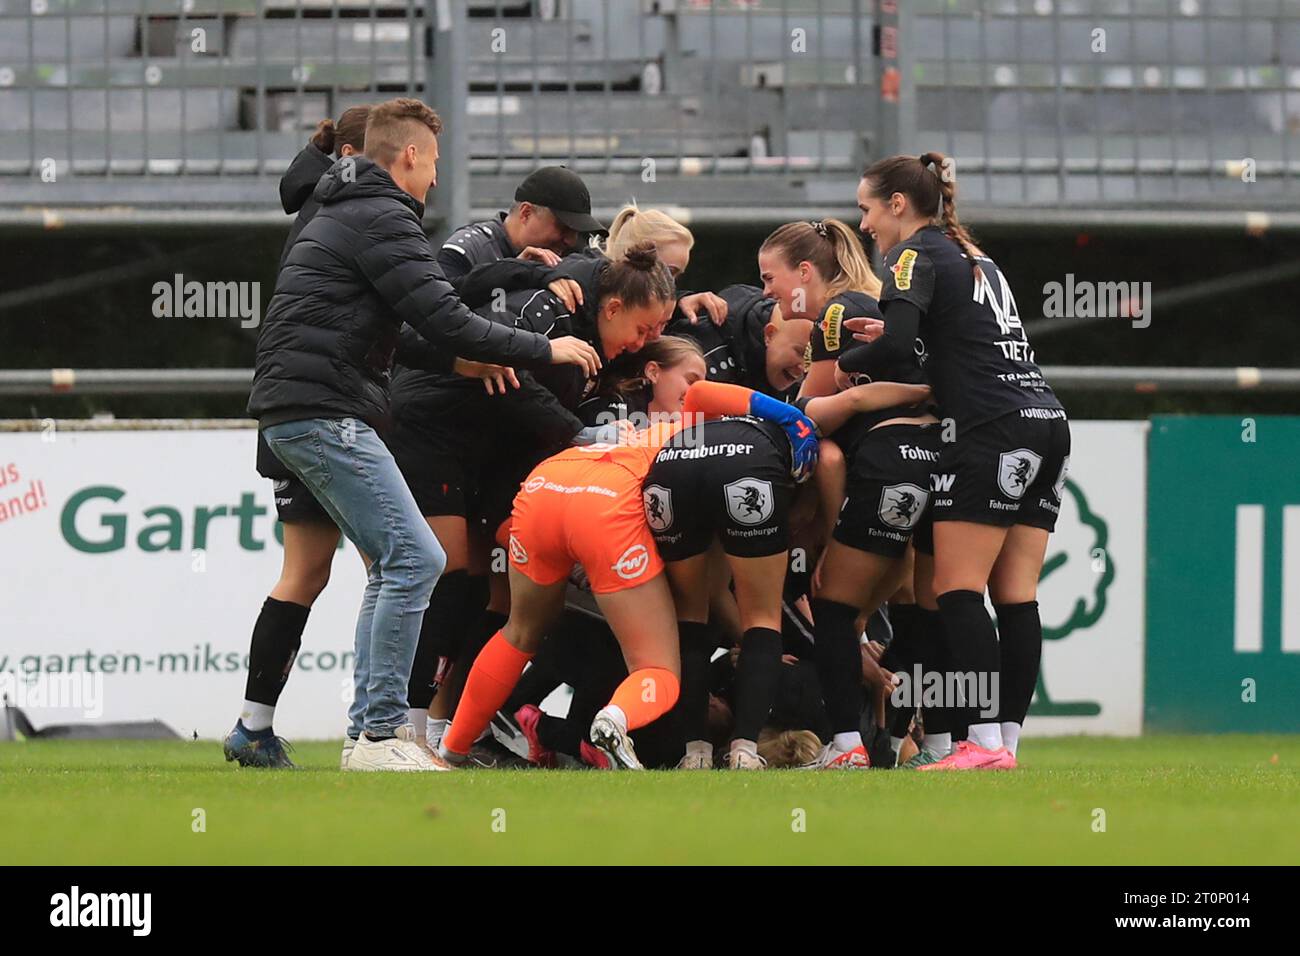 SCR Altach players celebarting their late winning goal during the Admiral Frauen Bundesliga match First Vienna FC vs SCR Altach at Hohe Warte  (Tom Seiss/ SPP) Stock Photo